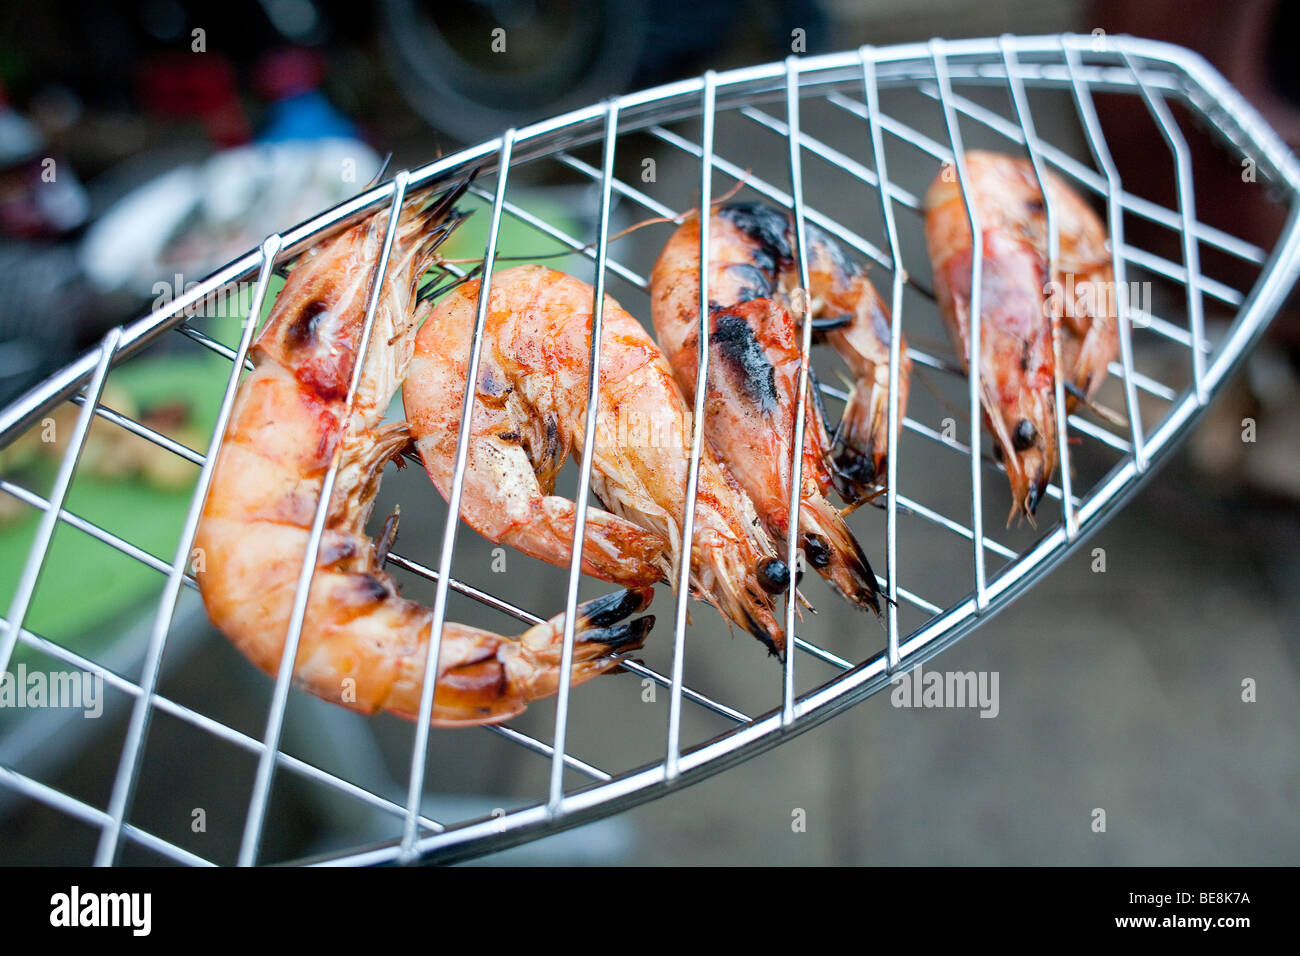 King prawns in barbeque grill Stock Photo